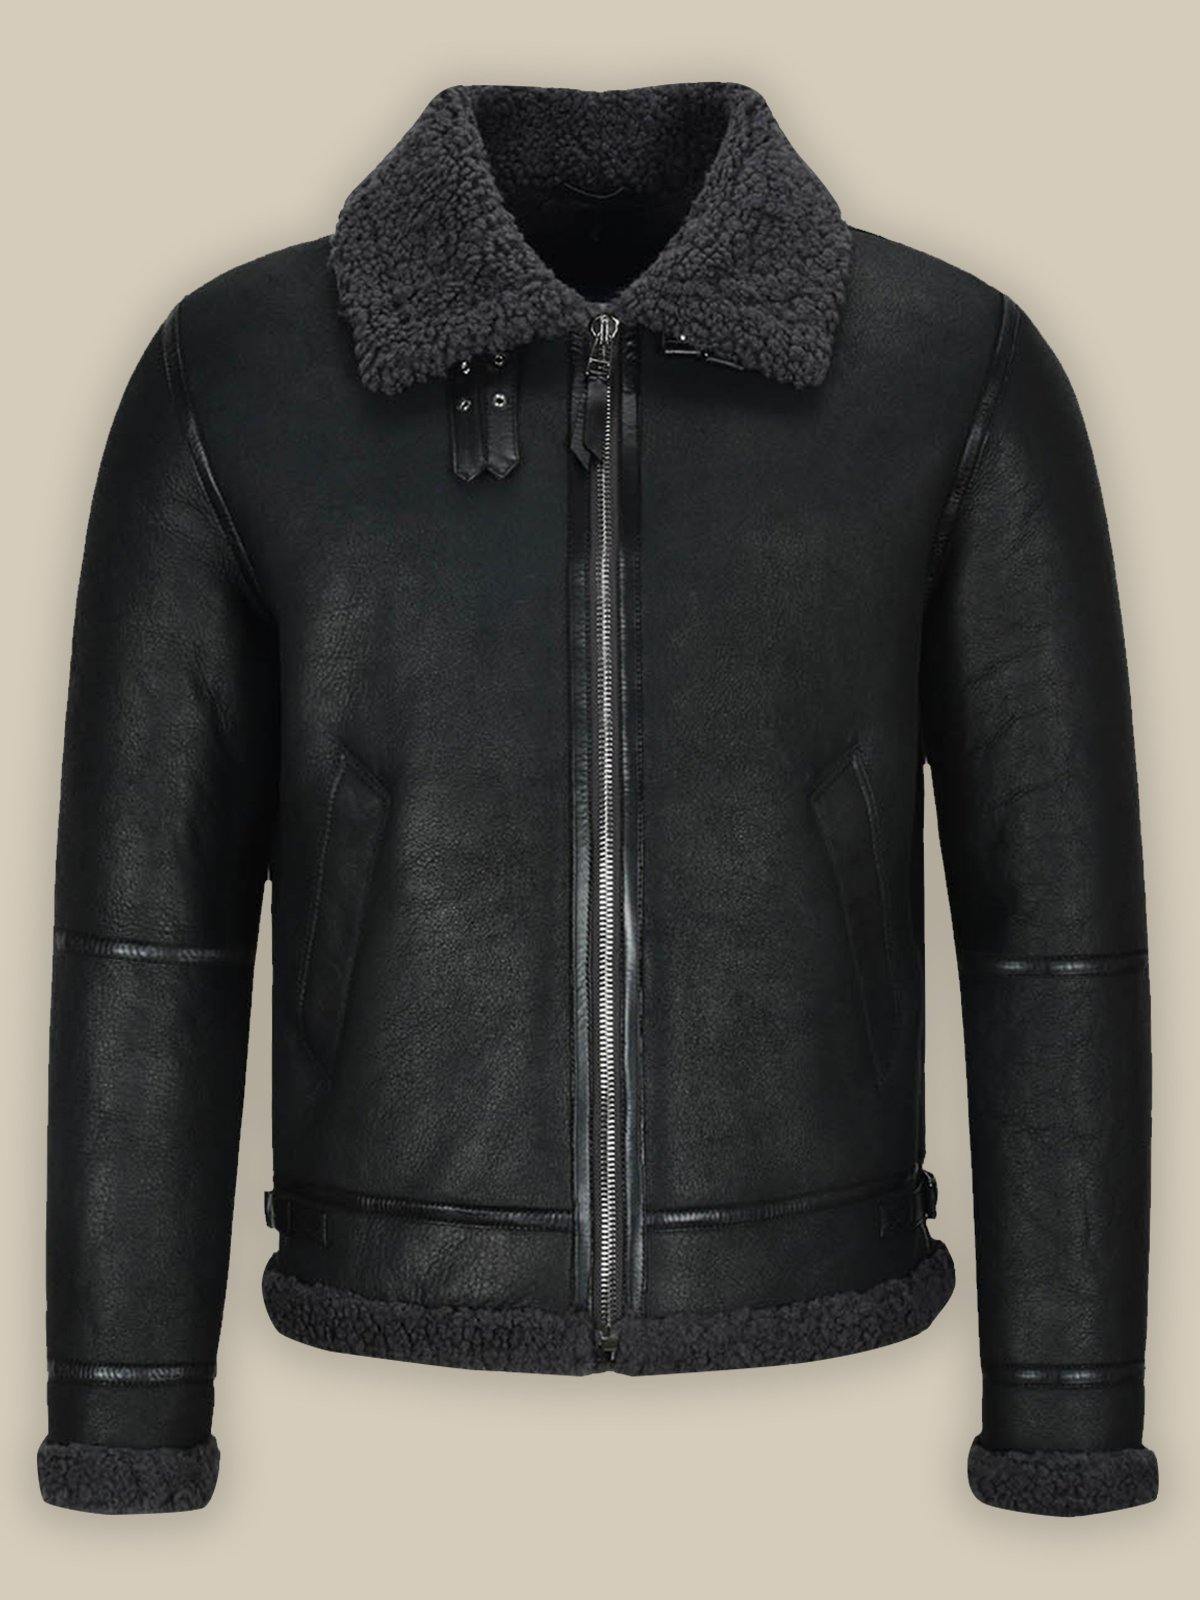 MEN’S B3 AIR FORCE SHEARLING JACKET - Wiseleather